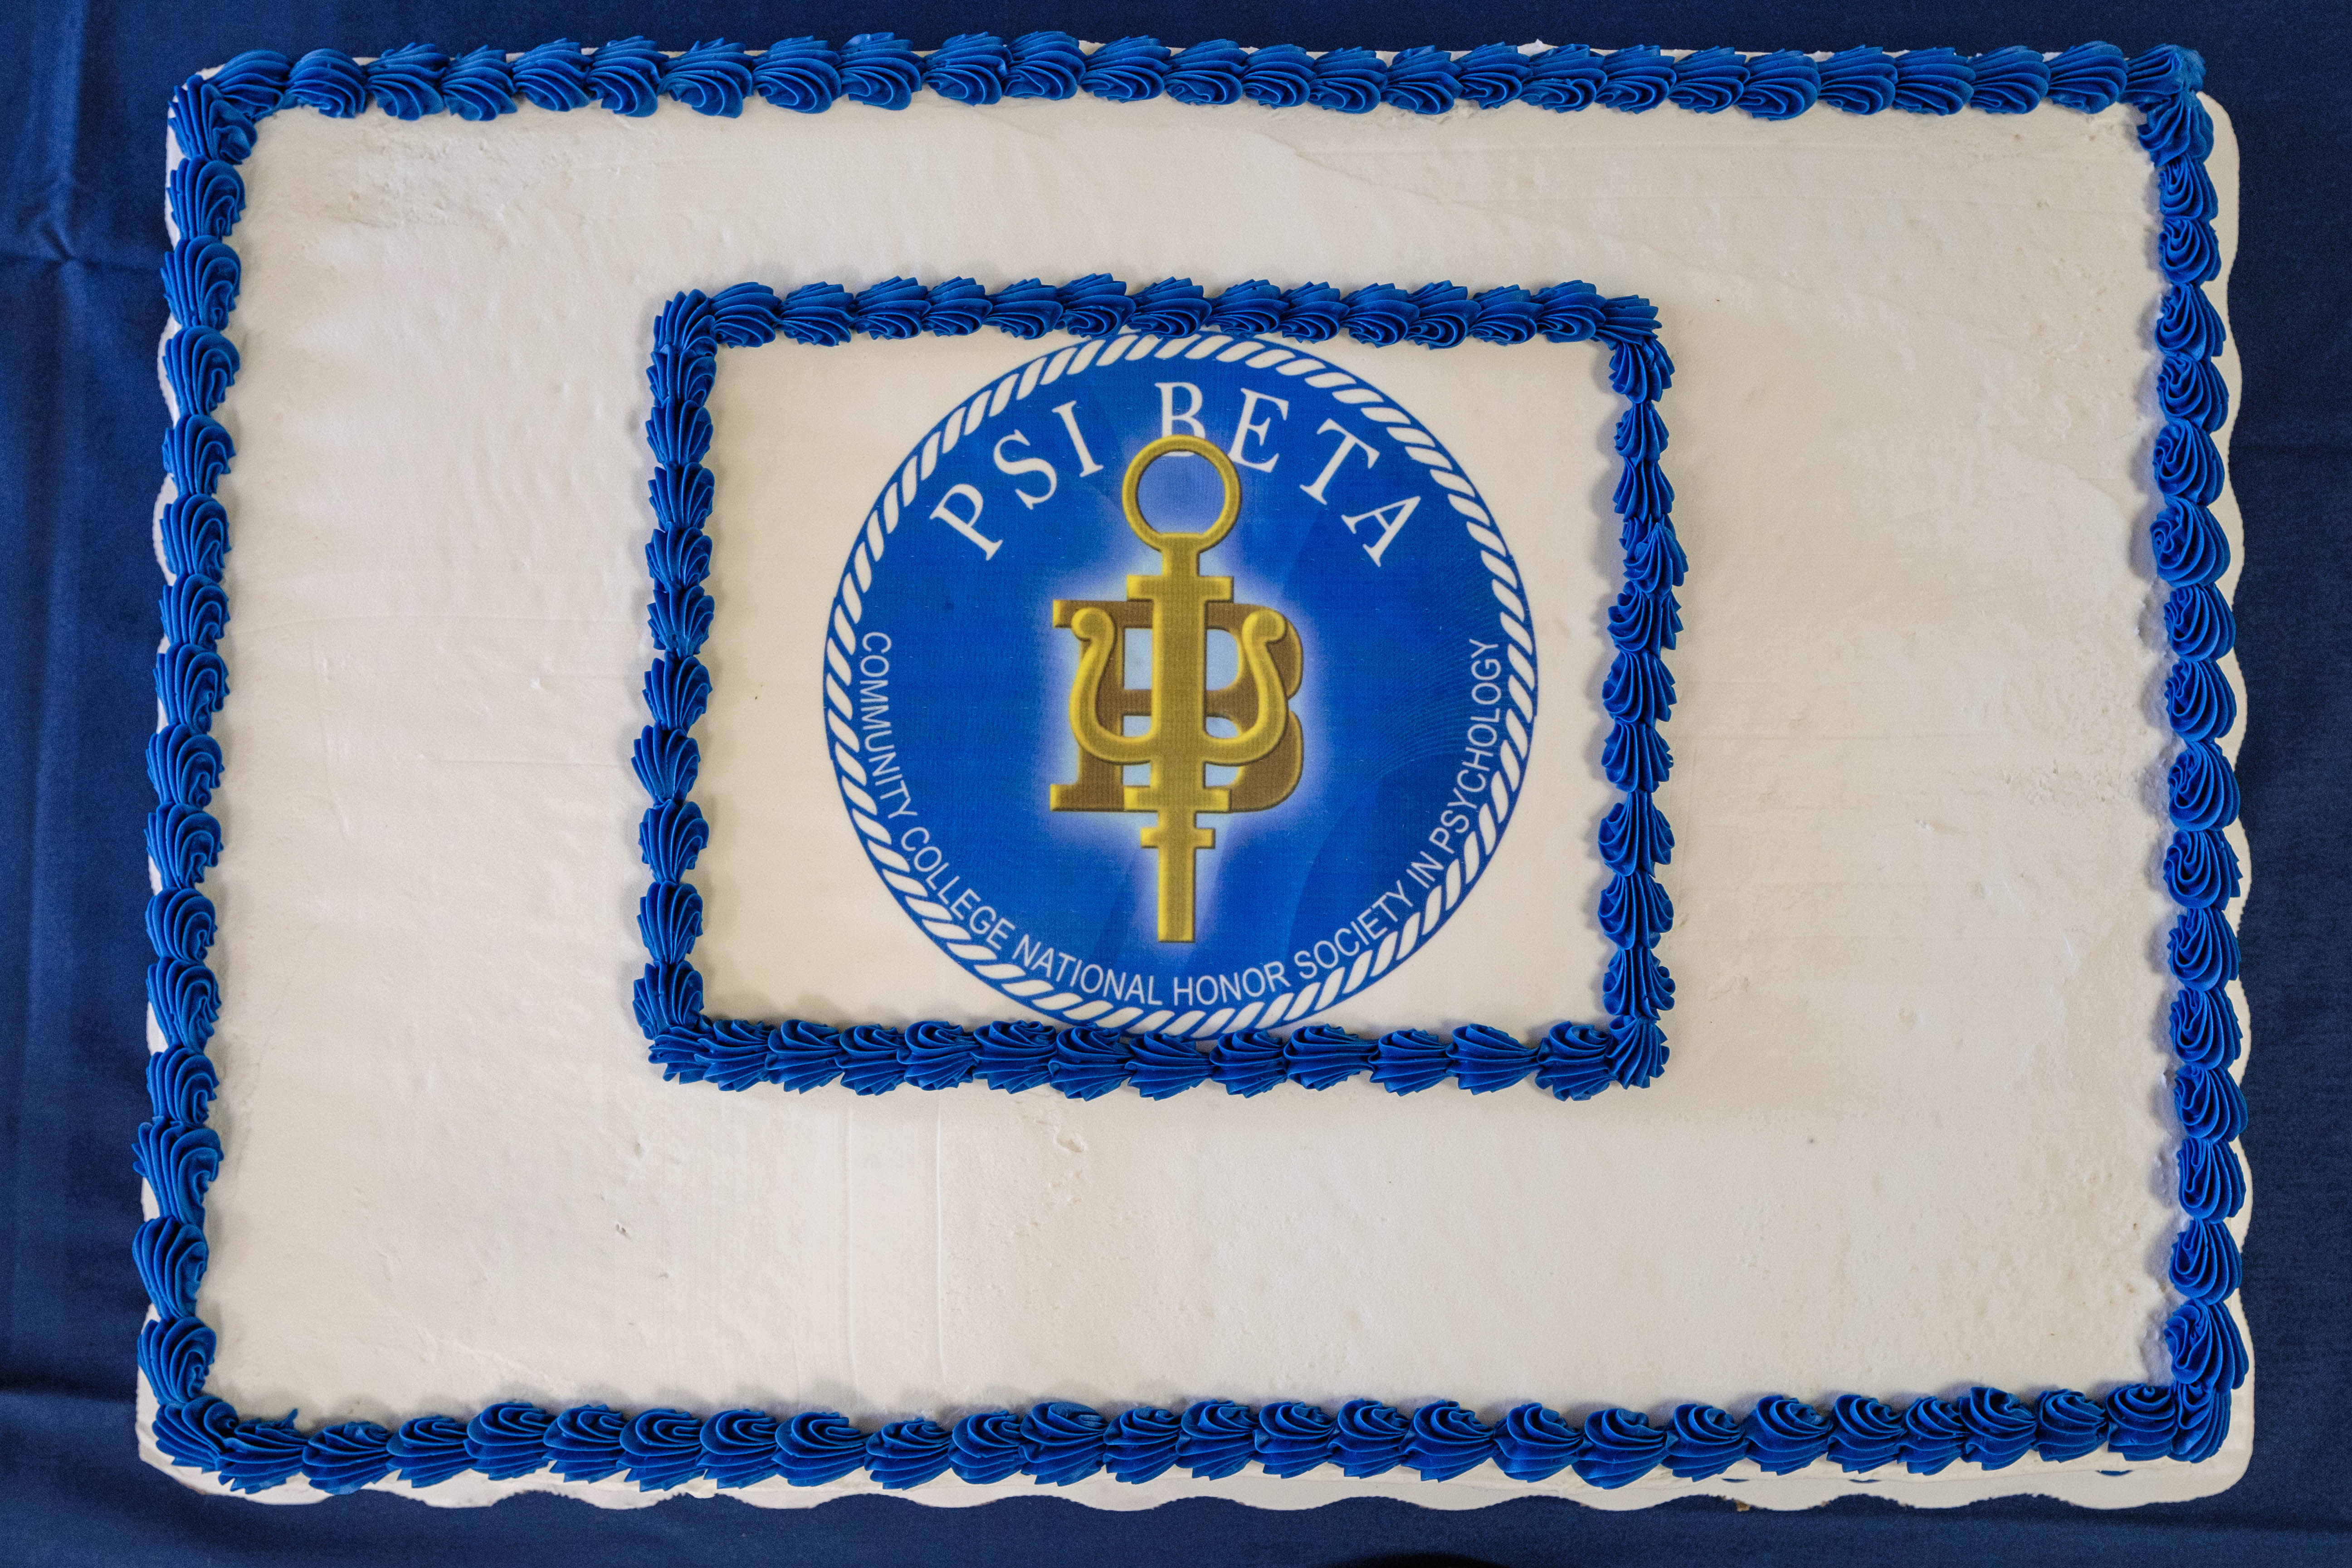 Cake for those attending the Psi Beta induction ceremony